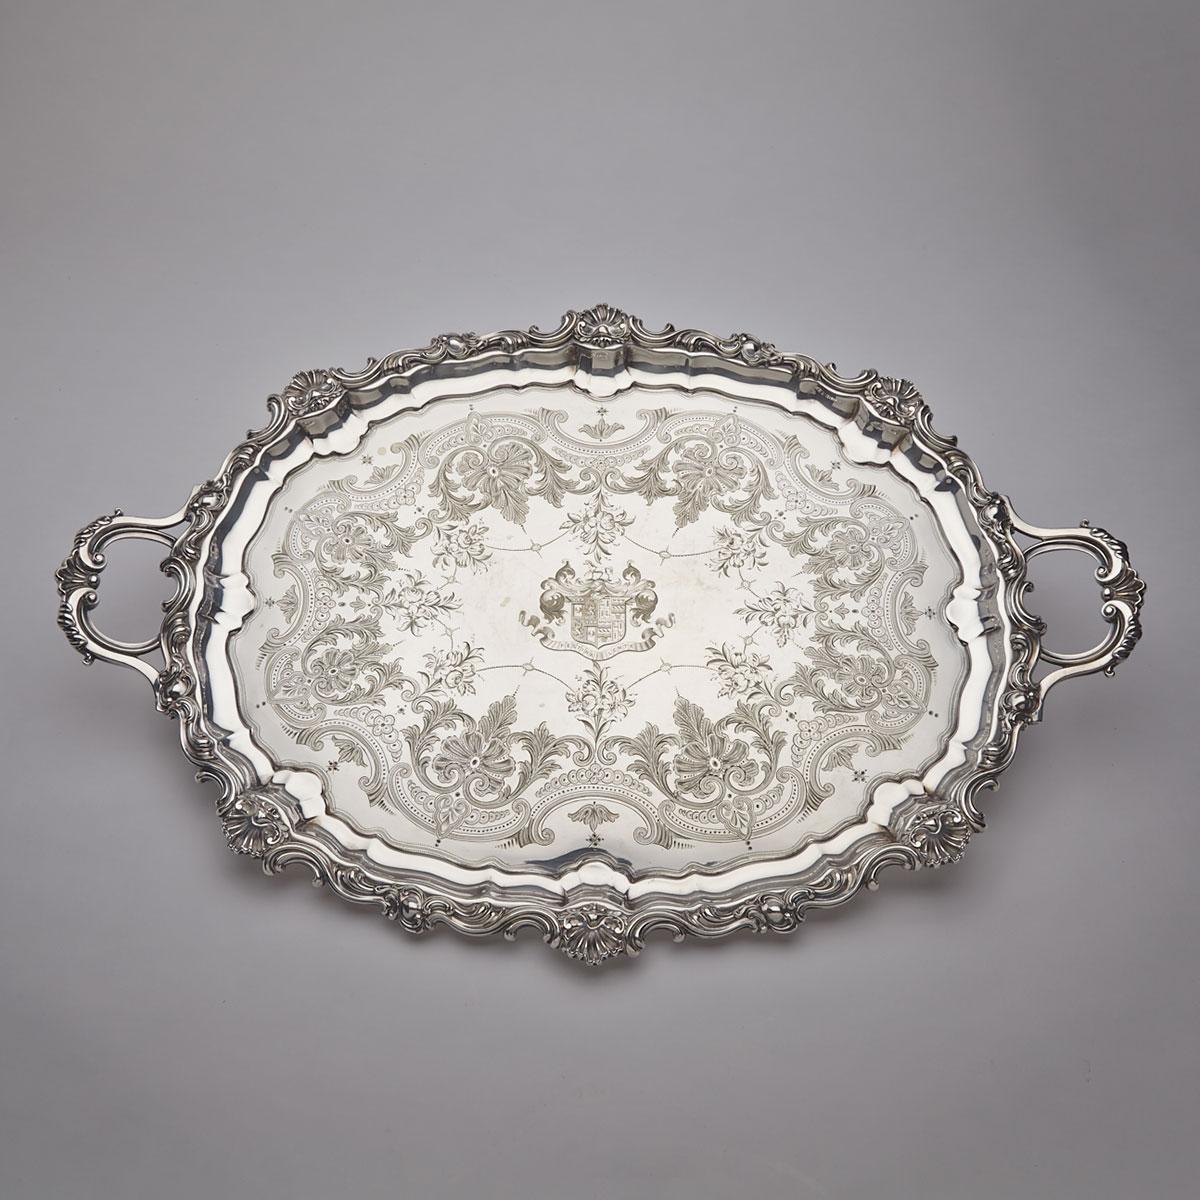 Victorian Silver Plated Two-Handled Oval Serving Tray, c.1870